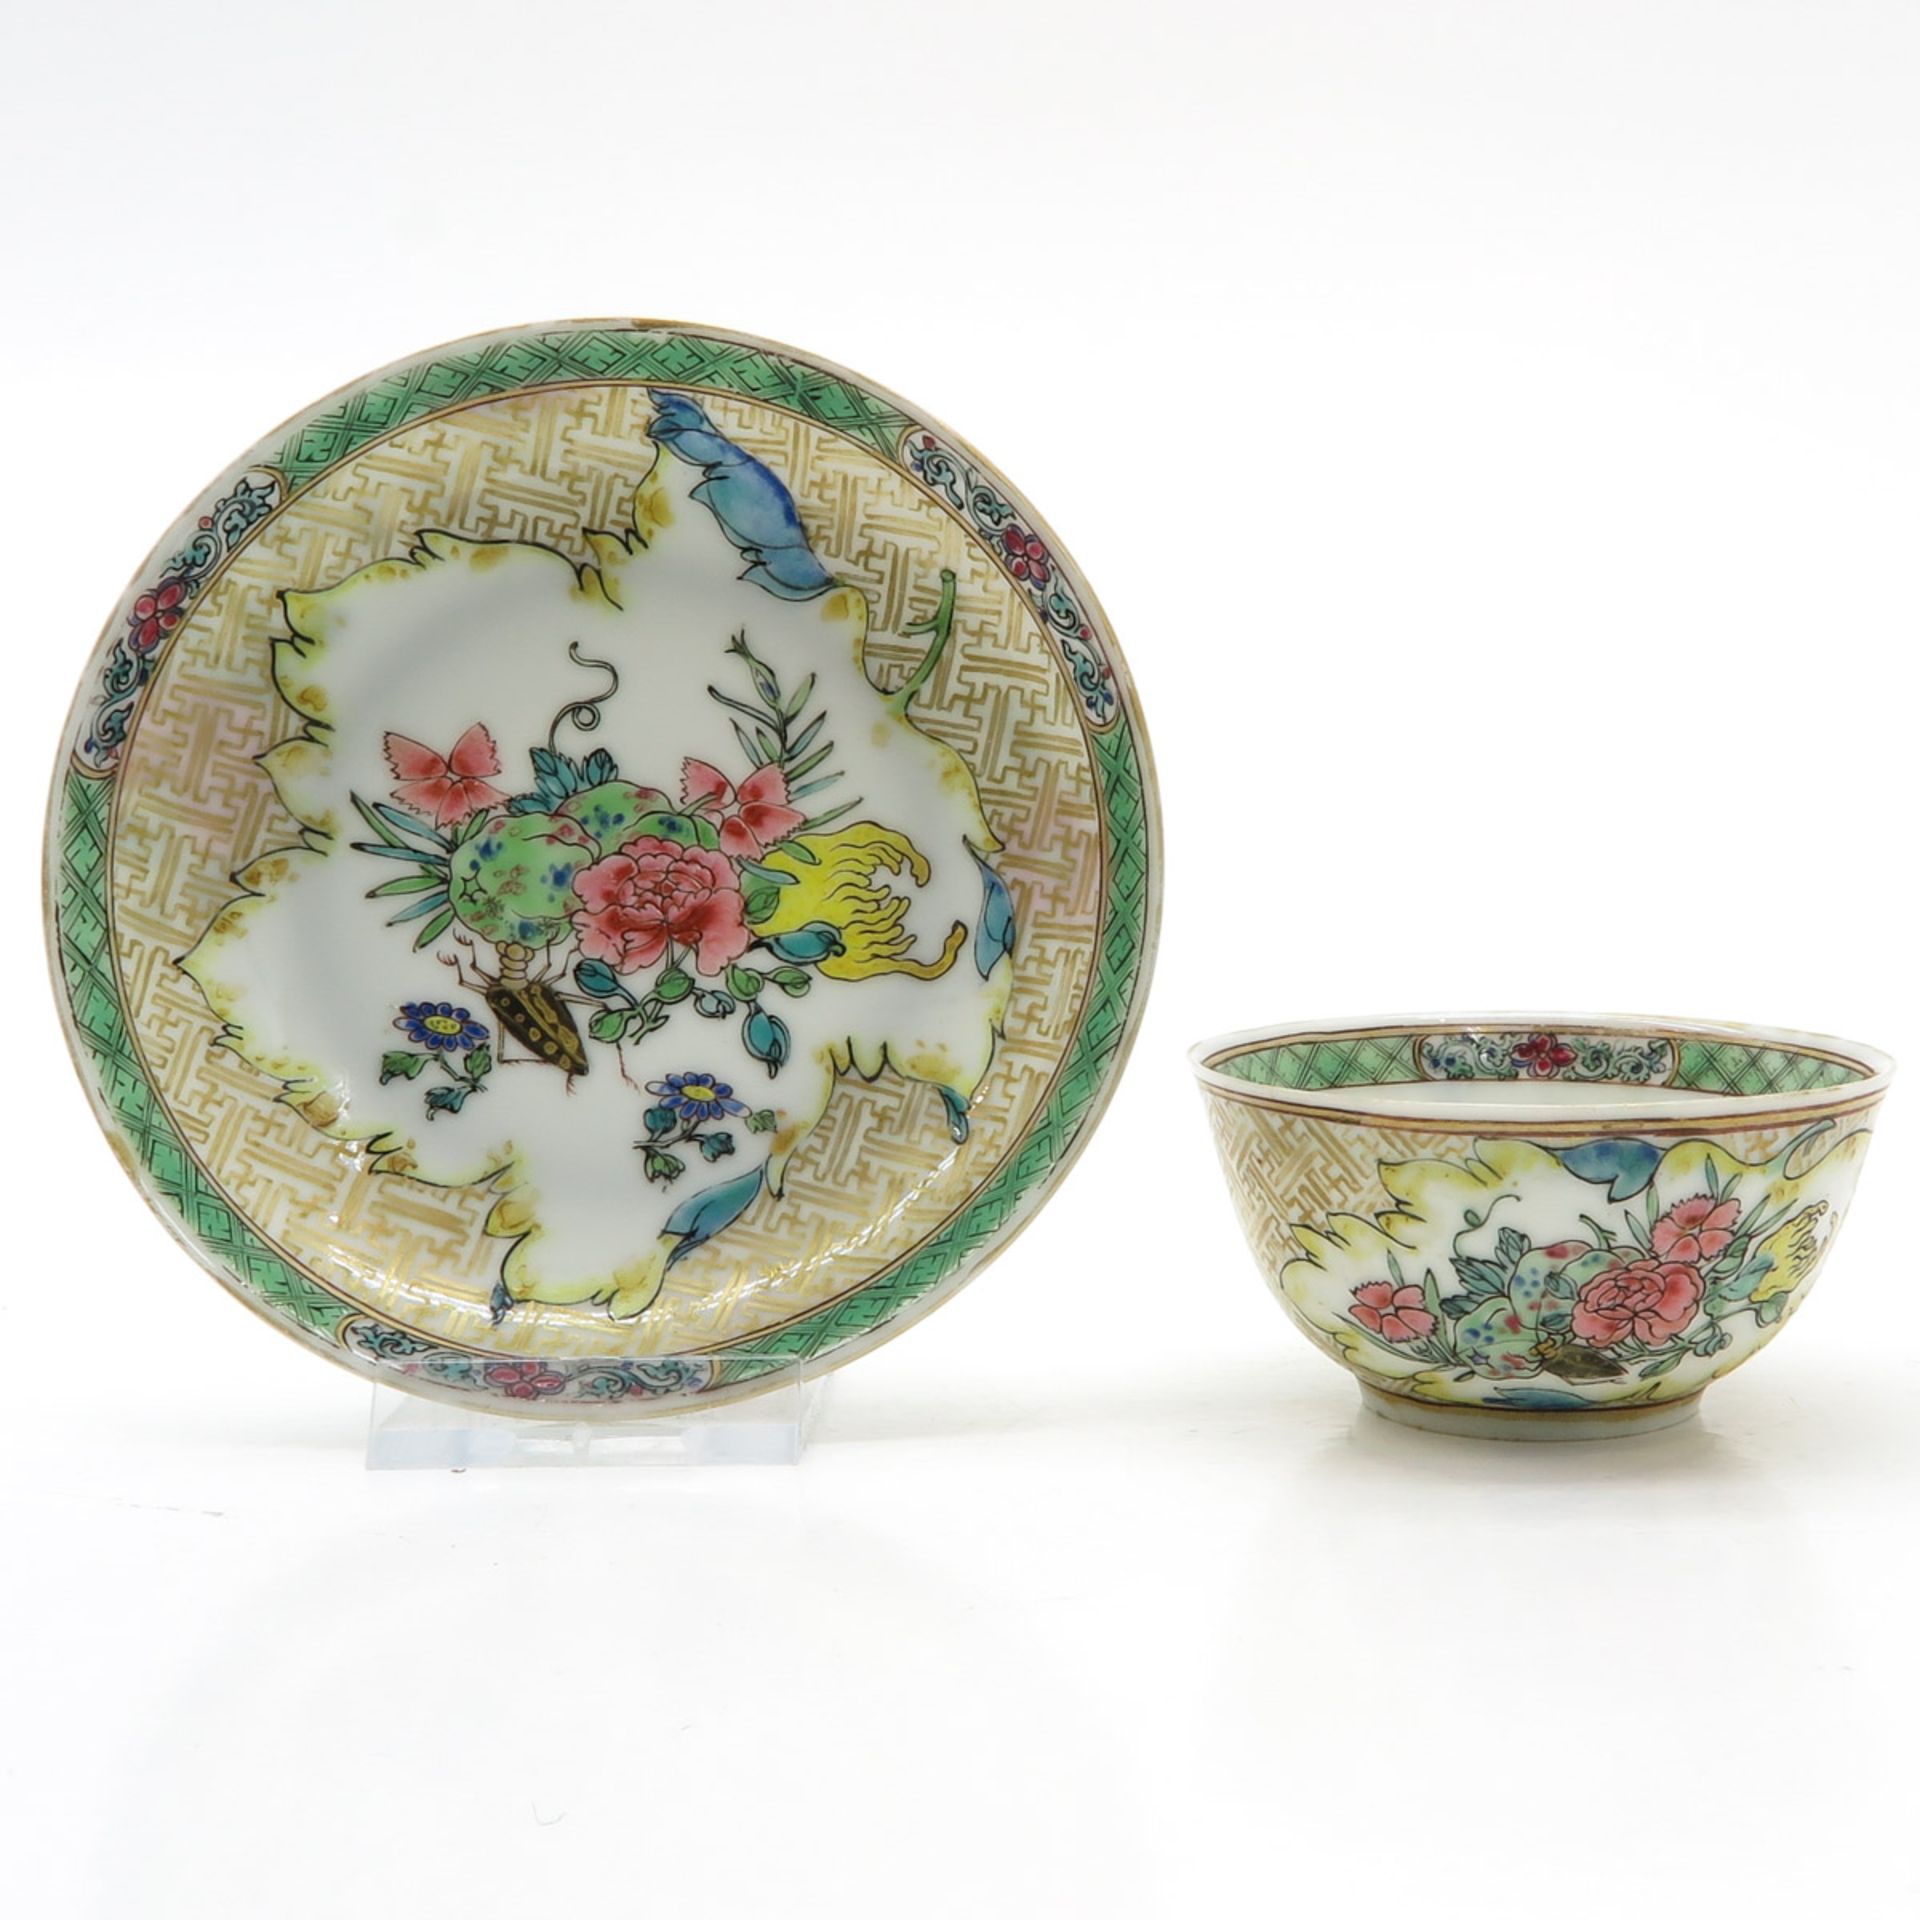 China Porcelain Cup and Saucer